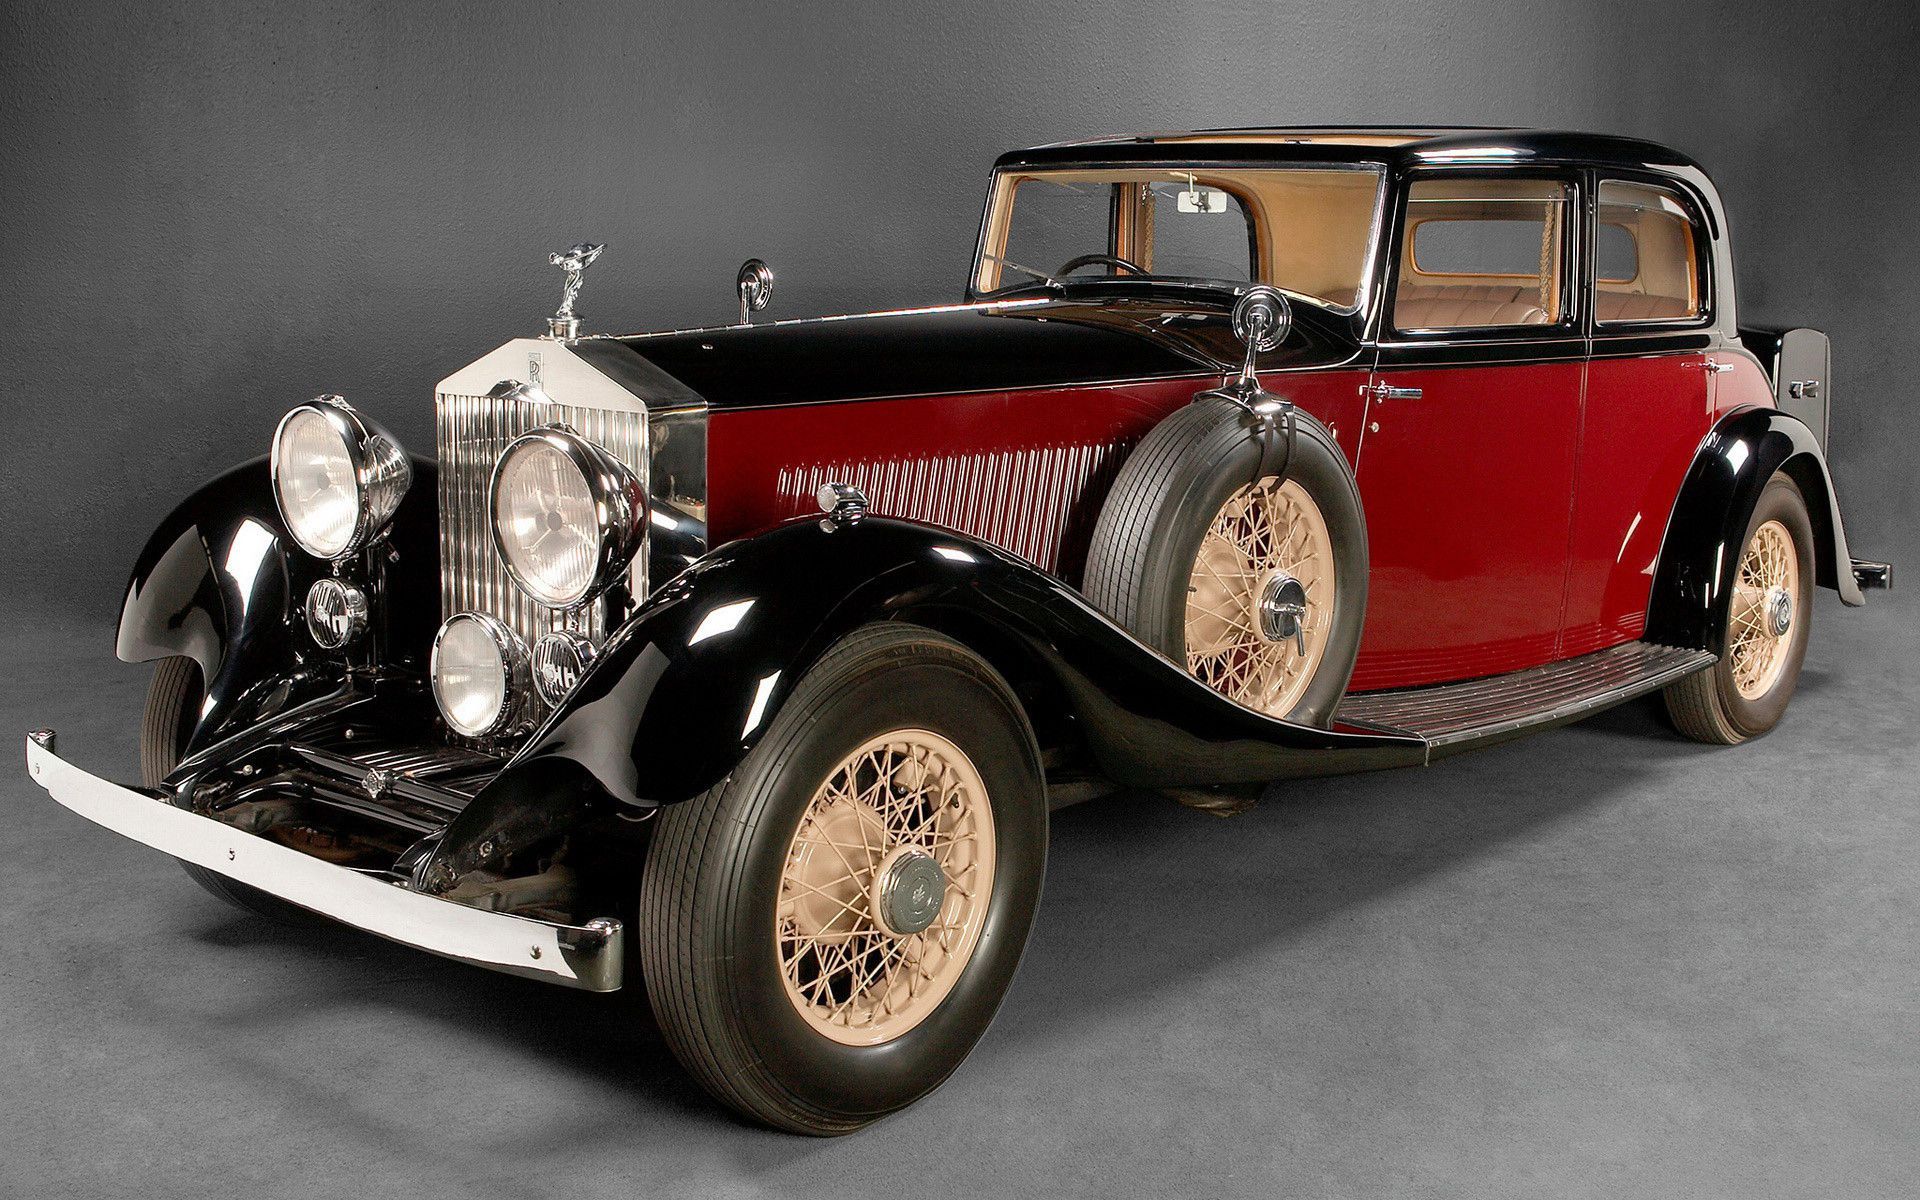 The Timeless Elegance of Old Rolls-Royce